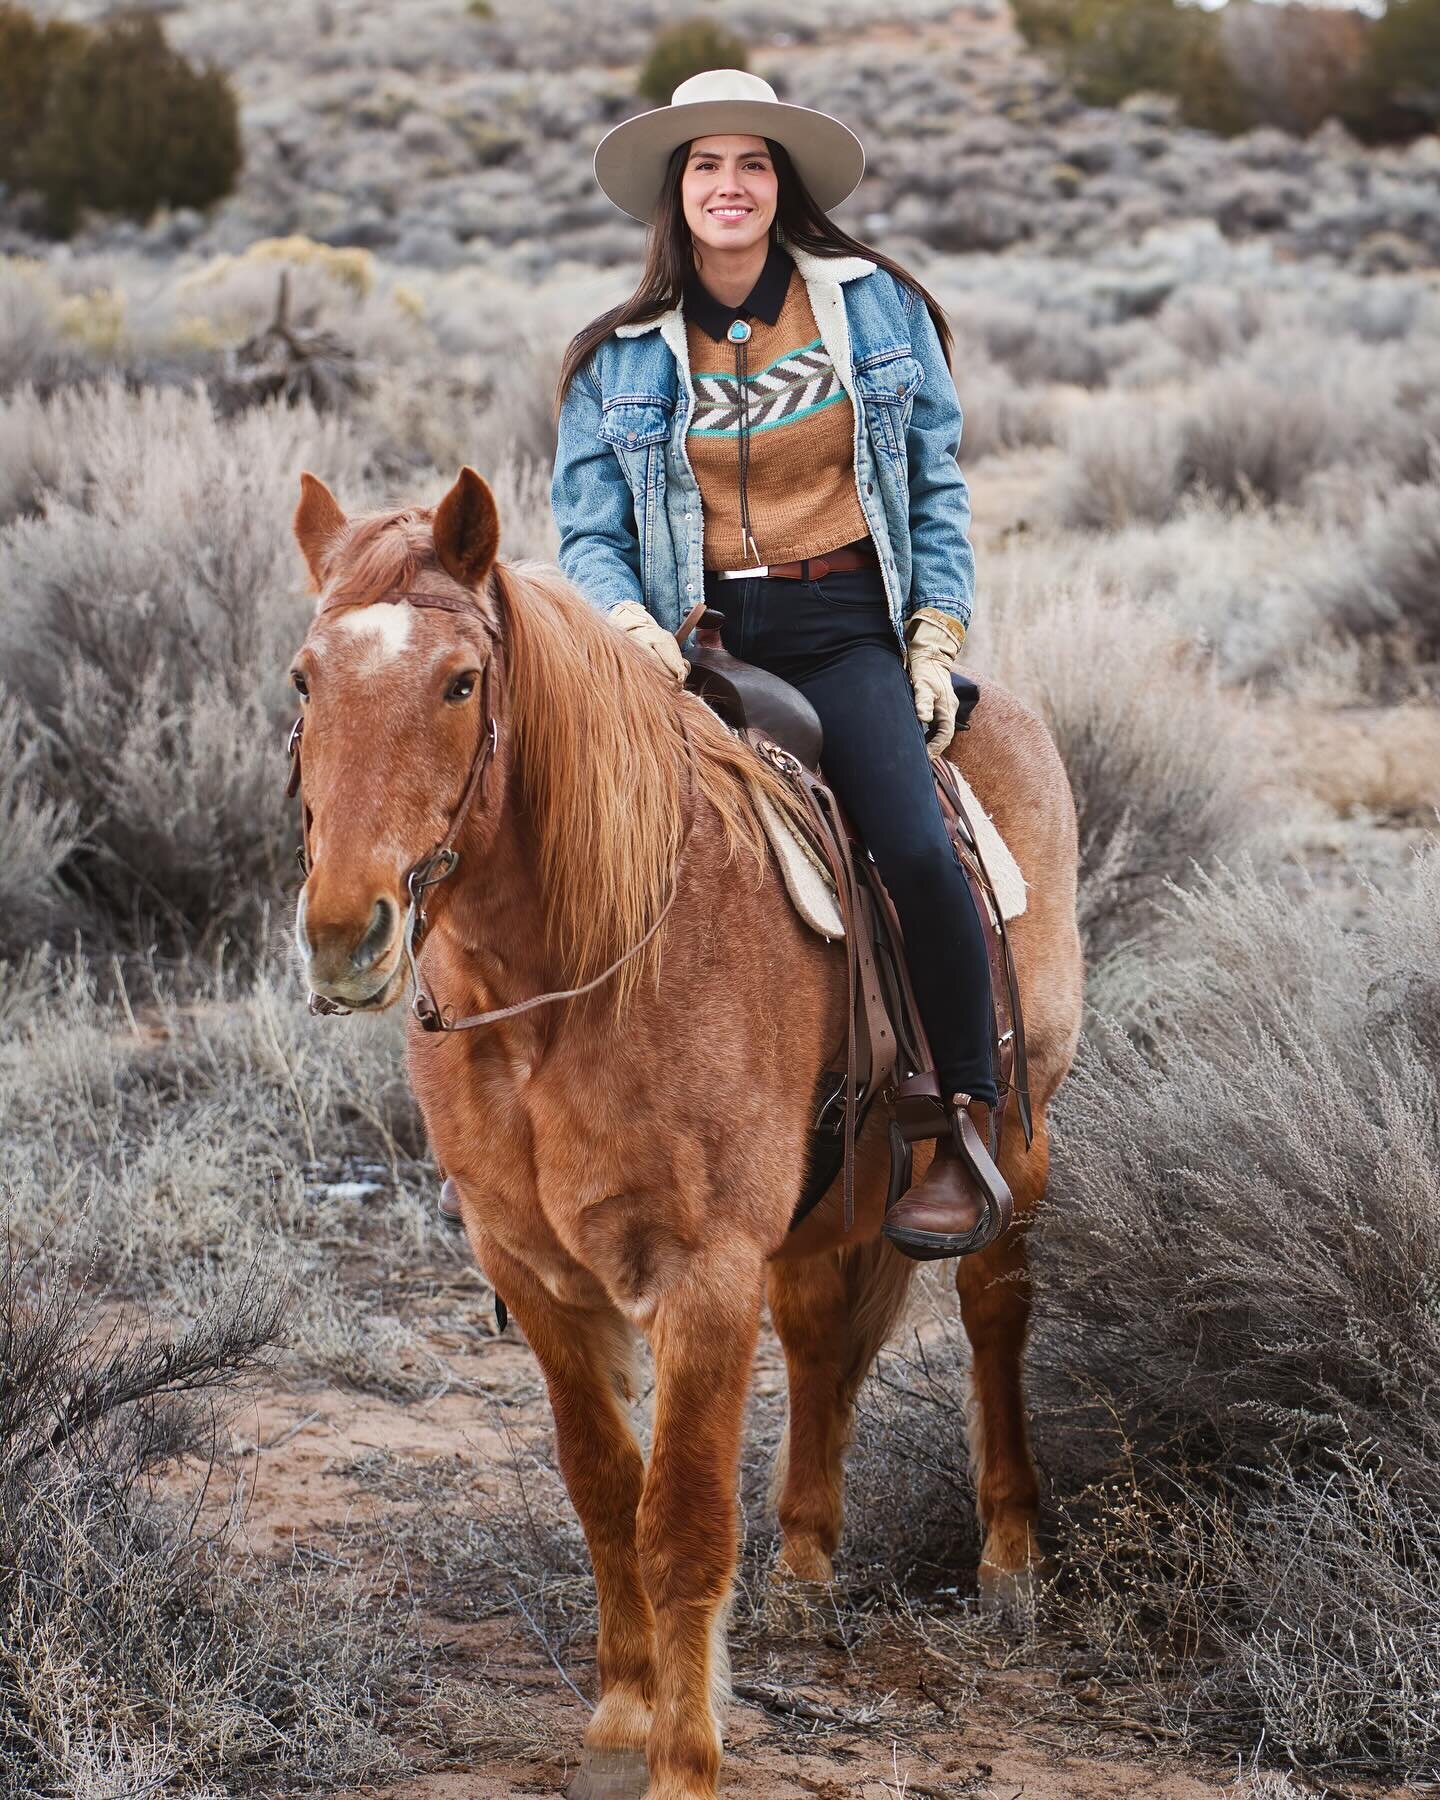 Hey Ya&rsquo;ll! Just over here hyping my Rodeo Sweater up! Comes out tomorrow and is meant to be a piece that is easily worn as a layer to keep you warm as you do your chores!🐴🤠💛 please share if you can😉
📷= @ddevriesphotography 
🧶= @baby.cat.y